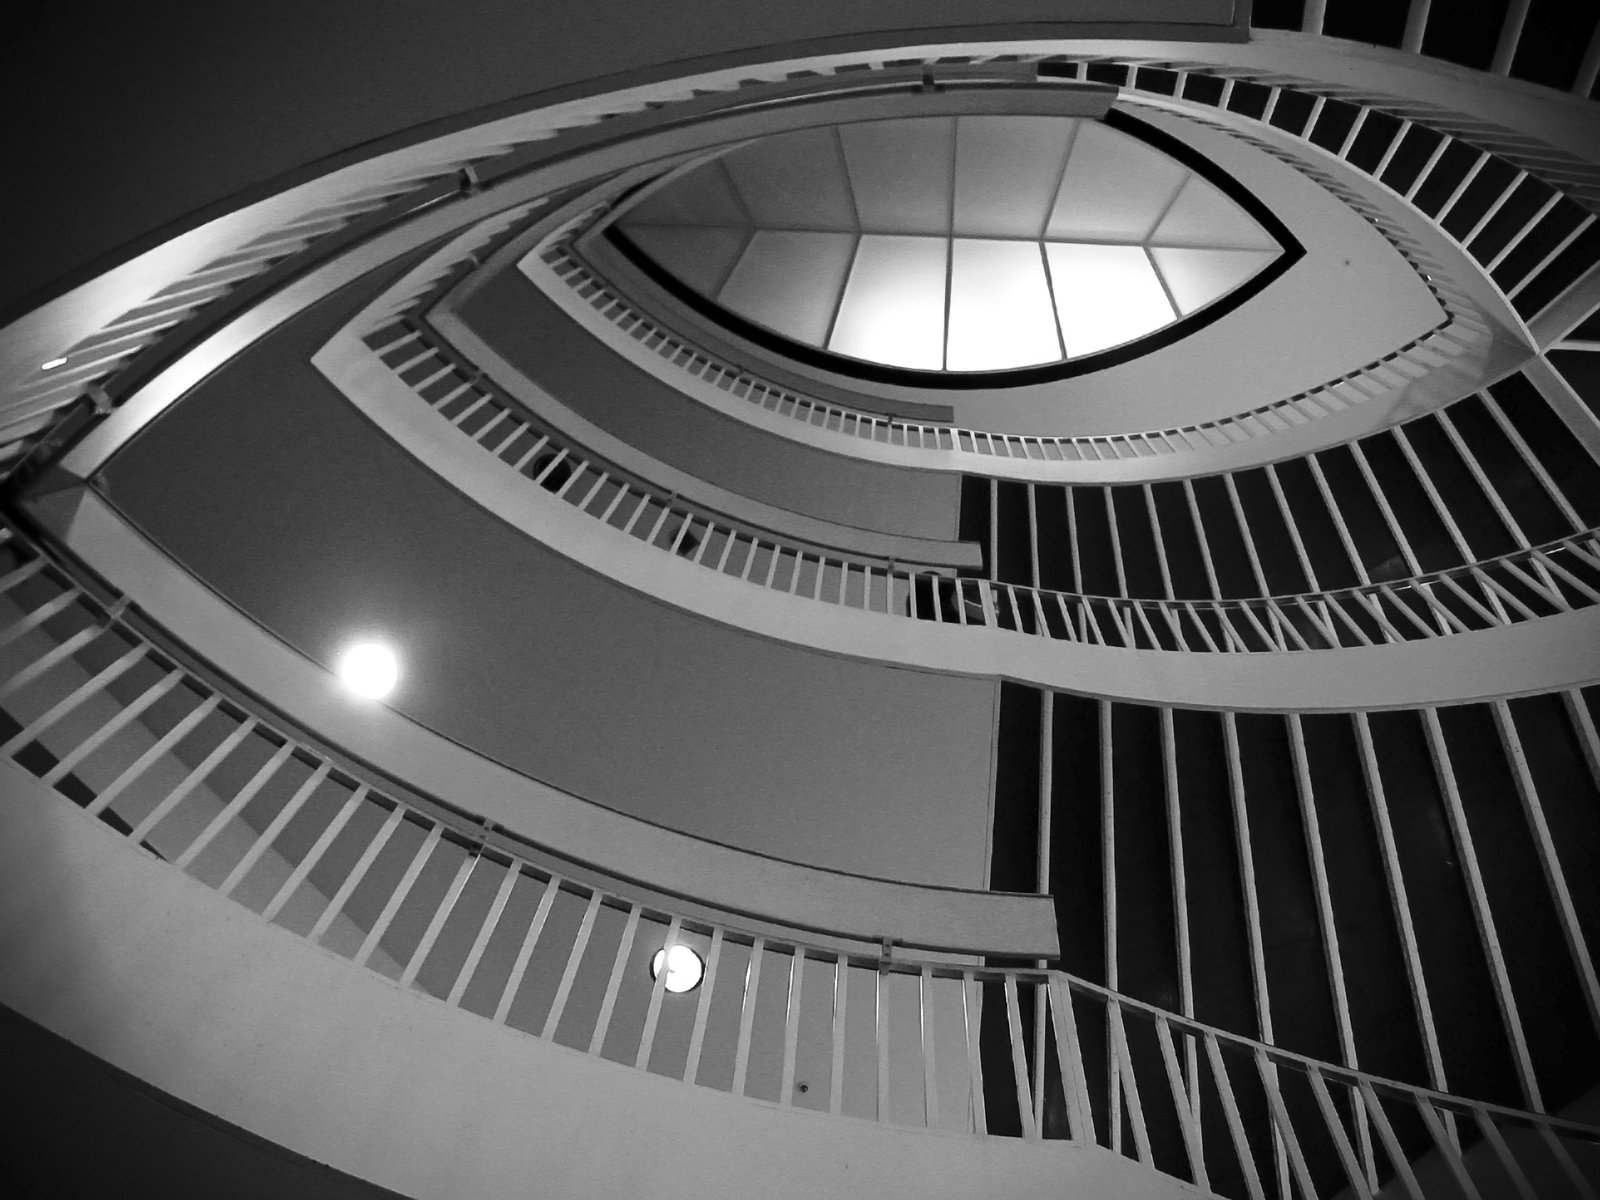 the interior staircase of a building with circular railings